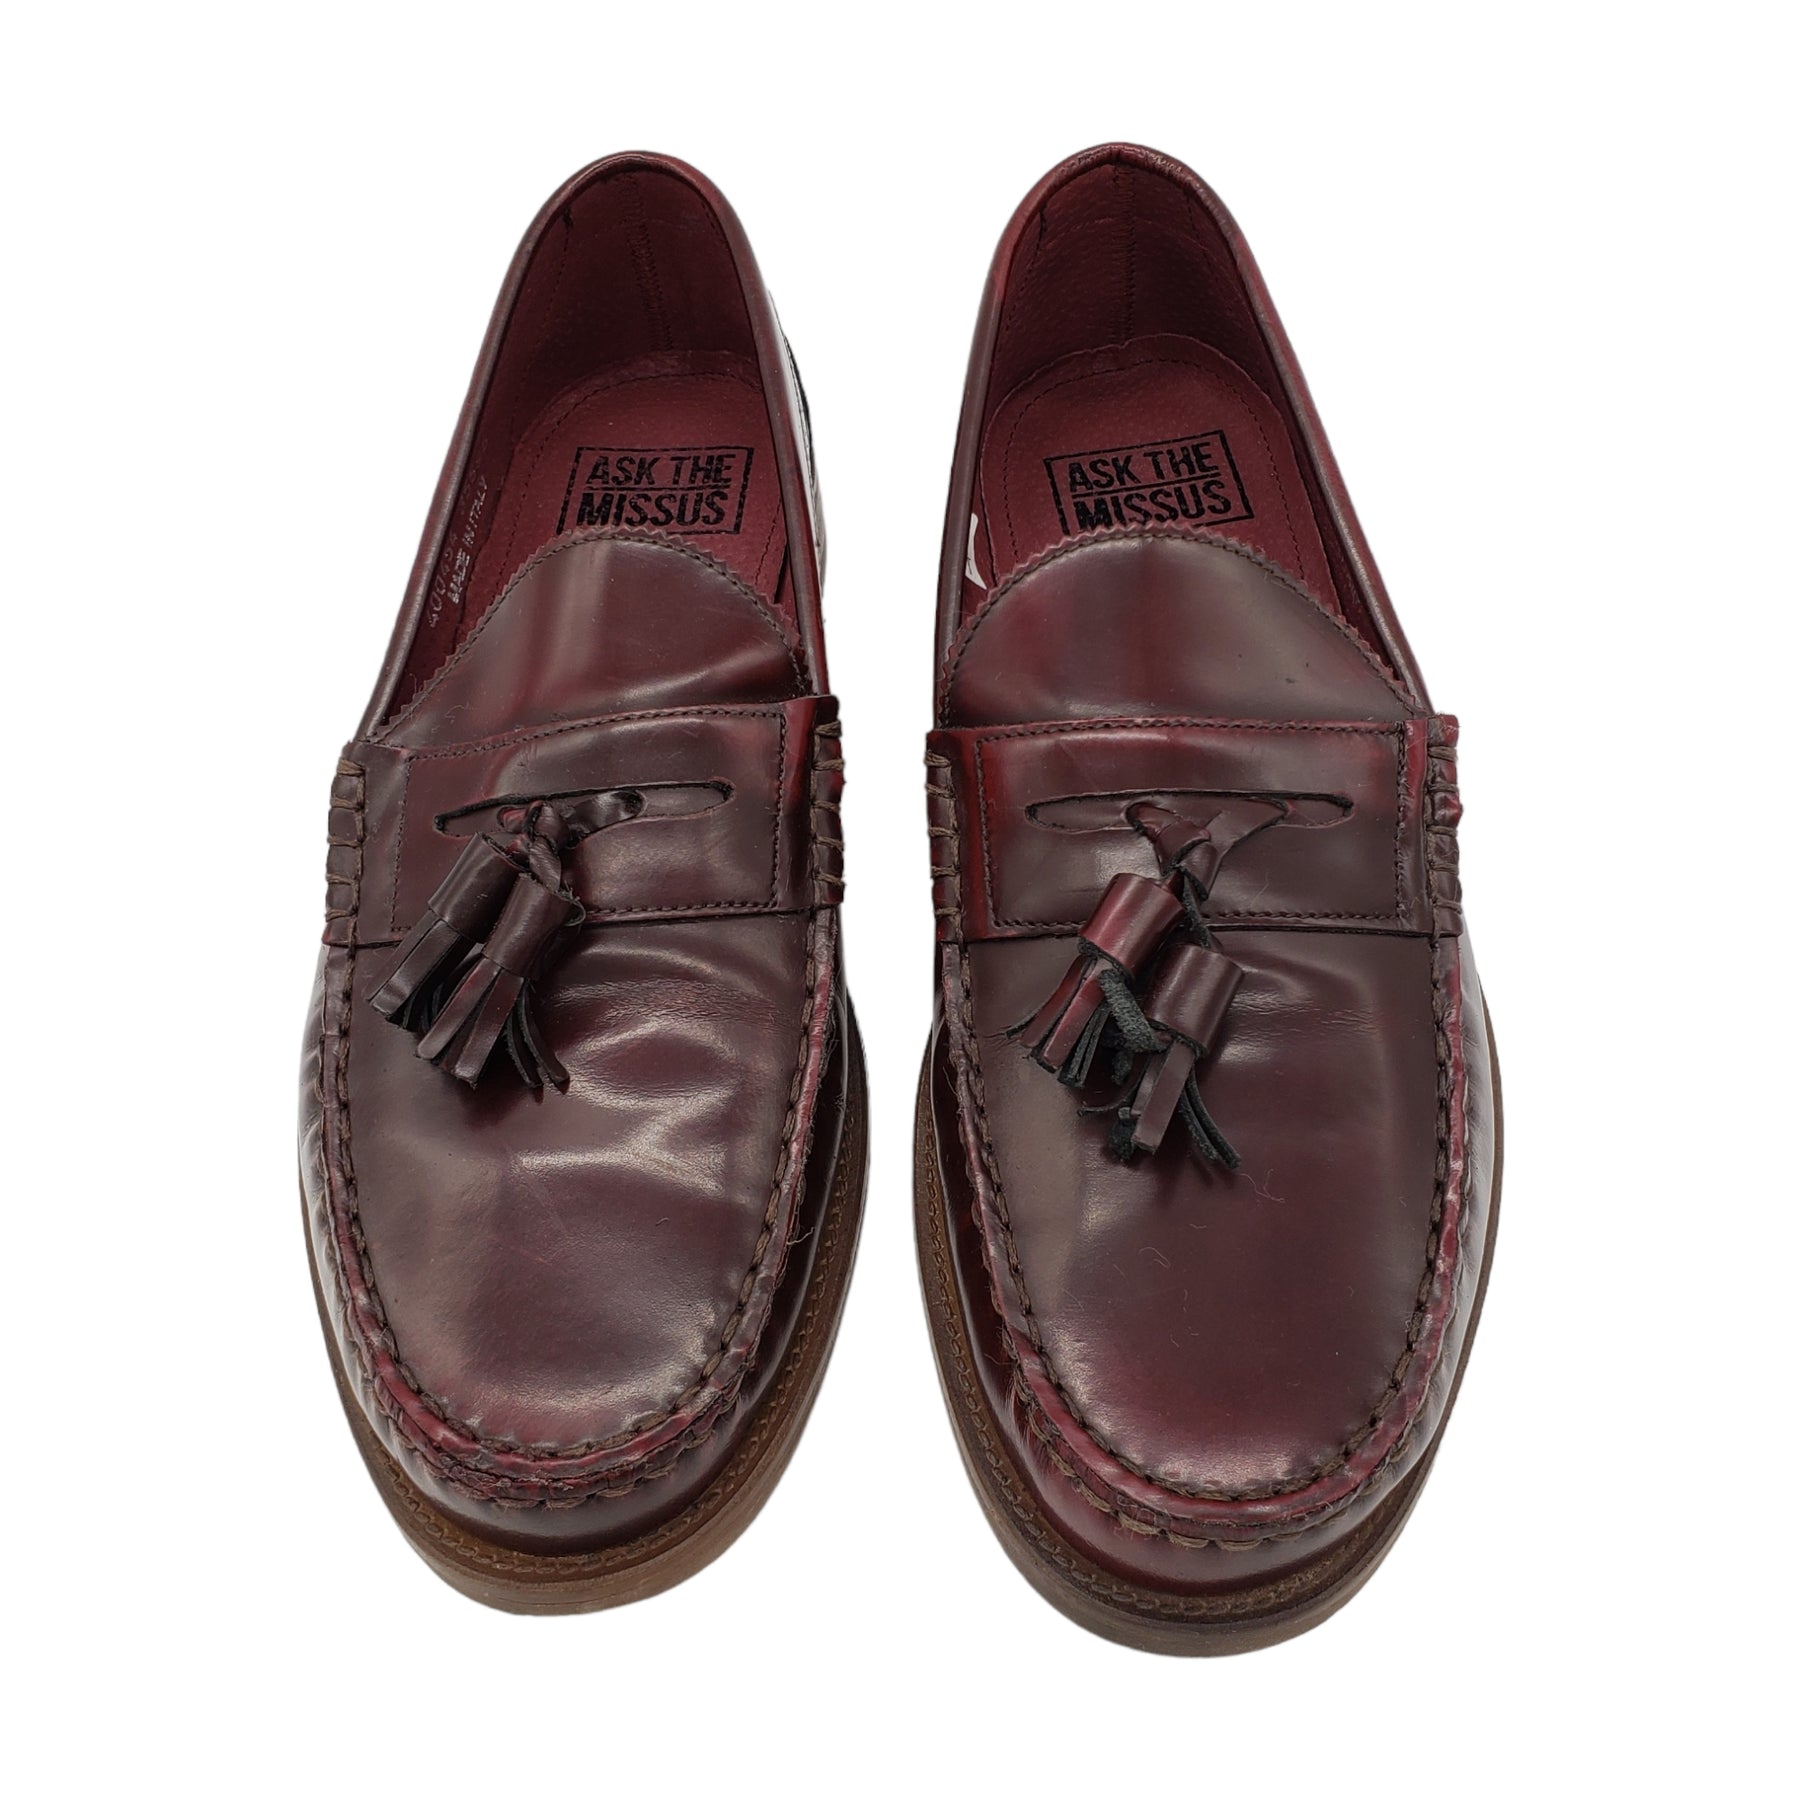 Ask The Missus Maroon Tasselled Loafer